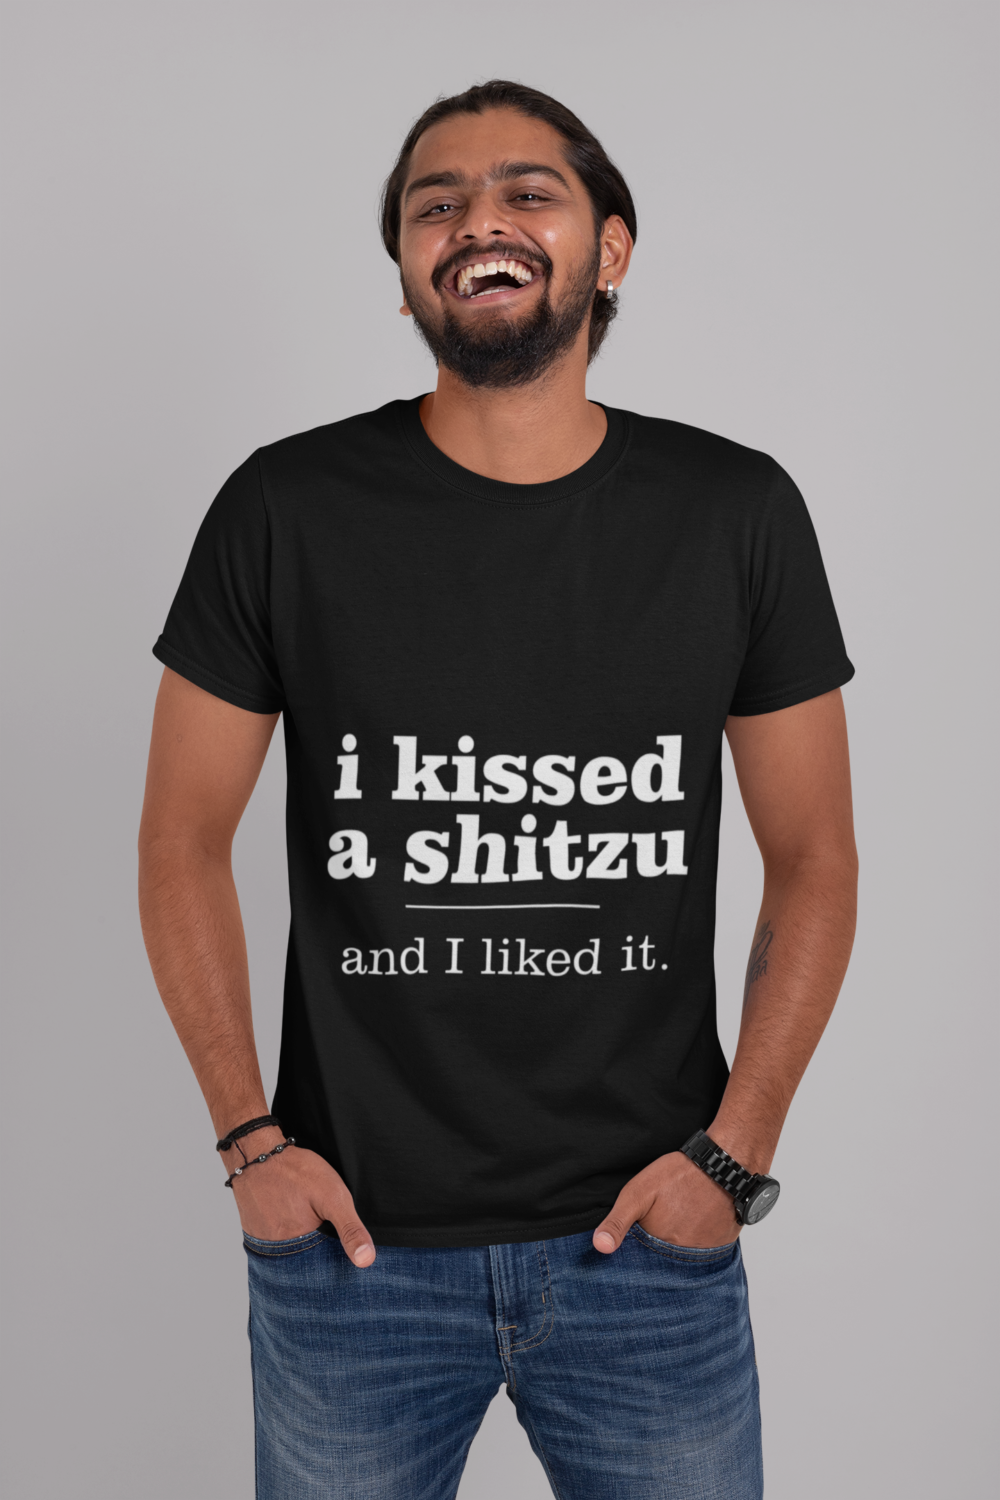 t shirt mockup of a bearded man laughing at a studio 29105